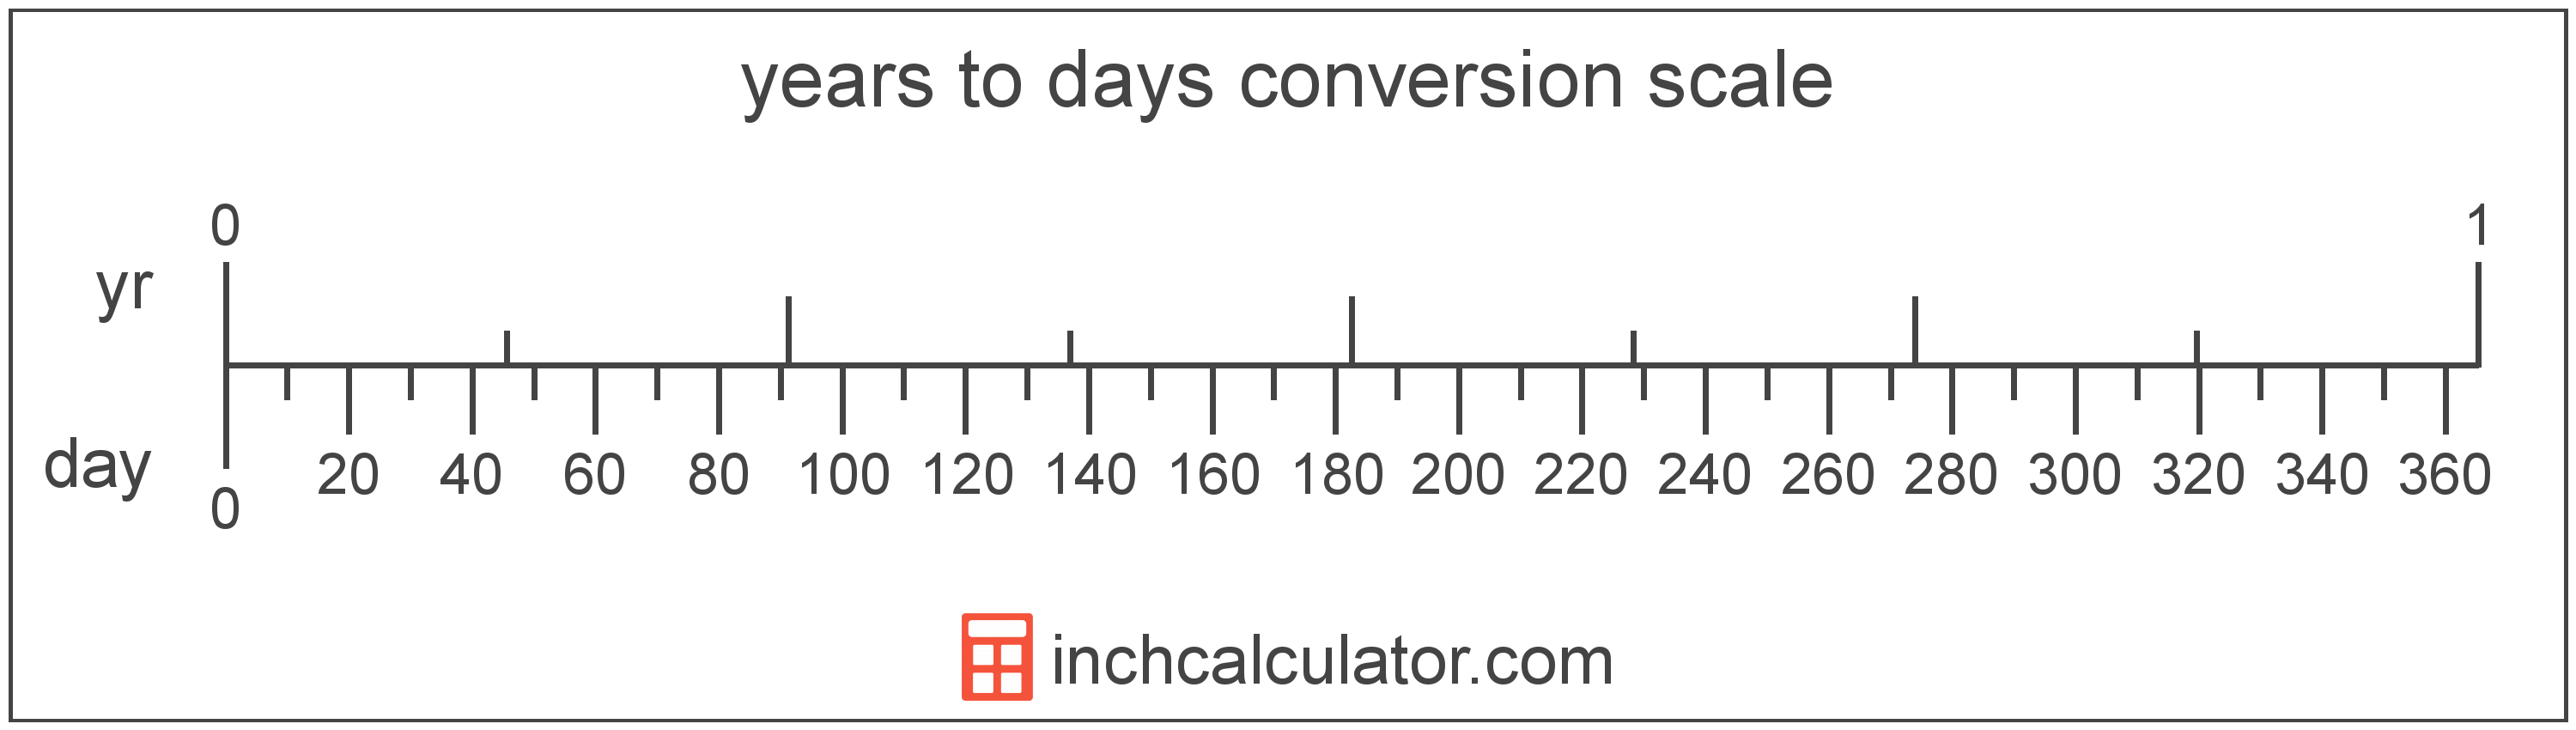 conversion scale showing years and equivalent days time values